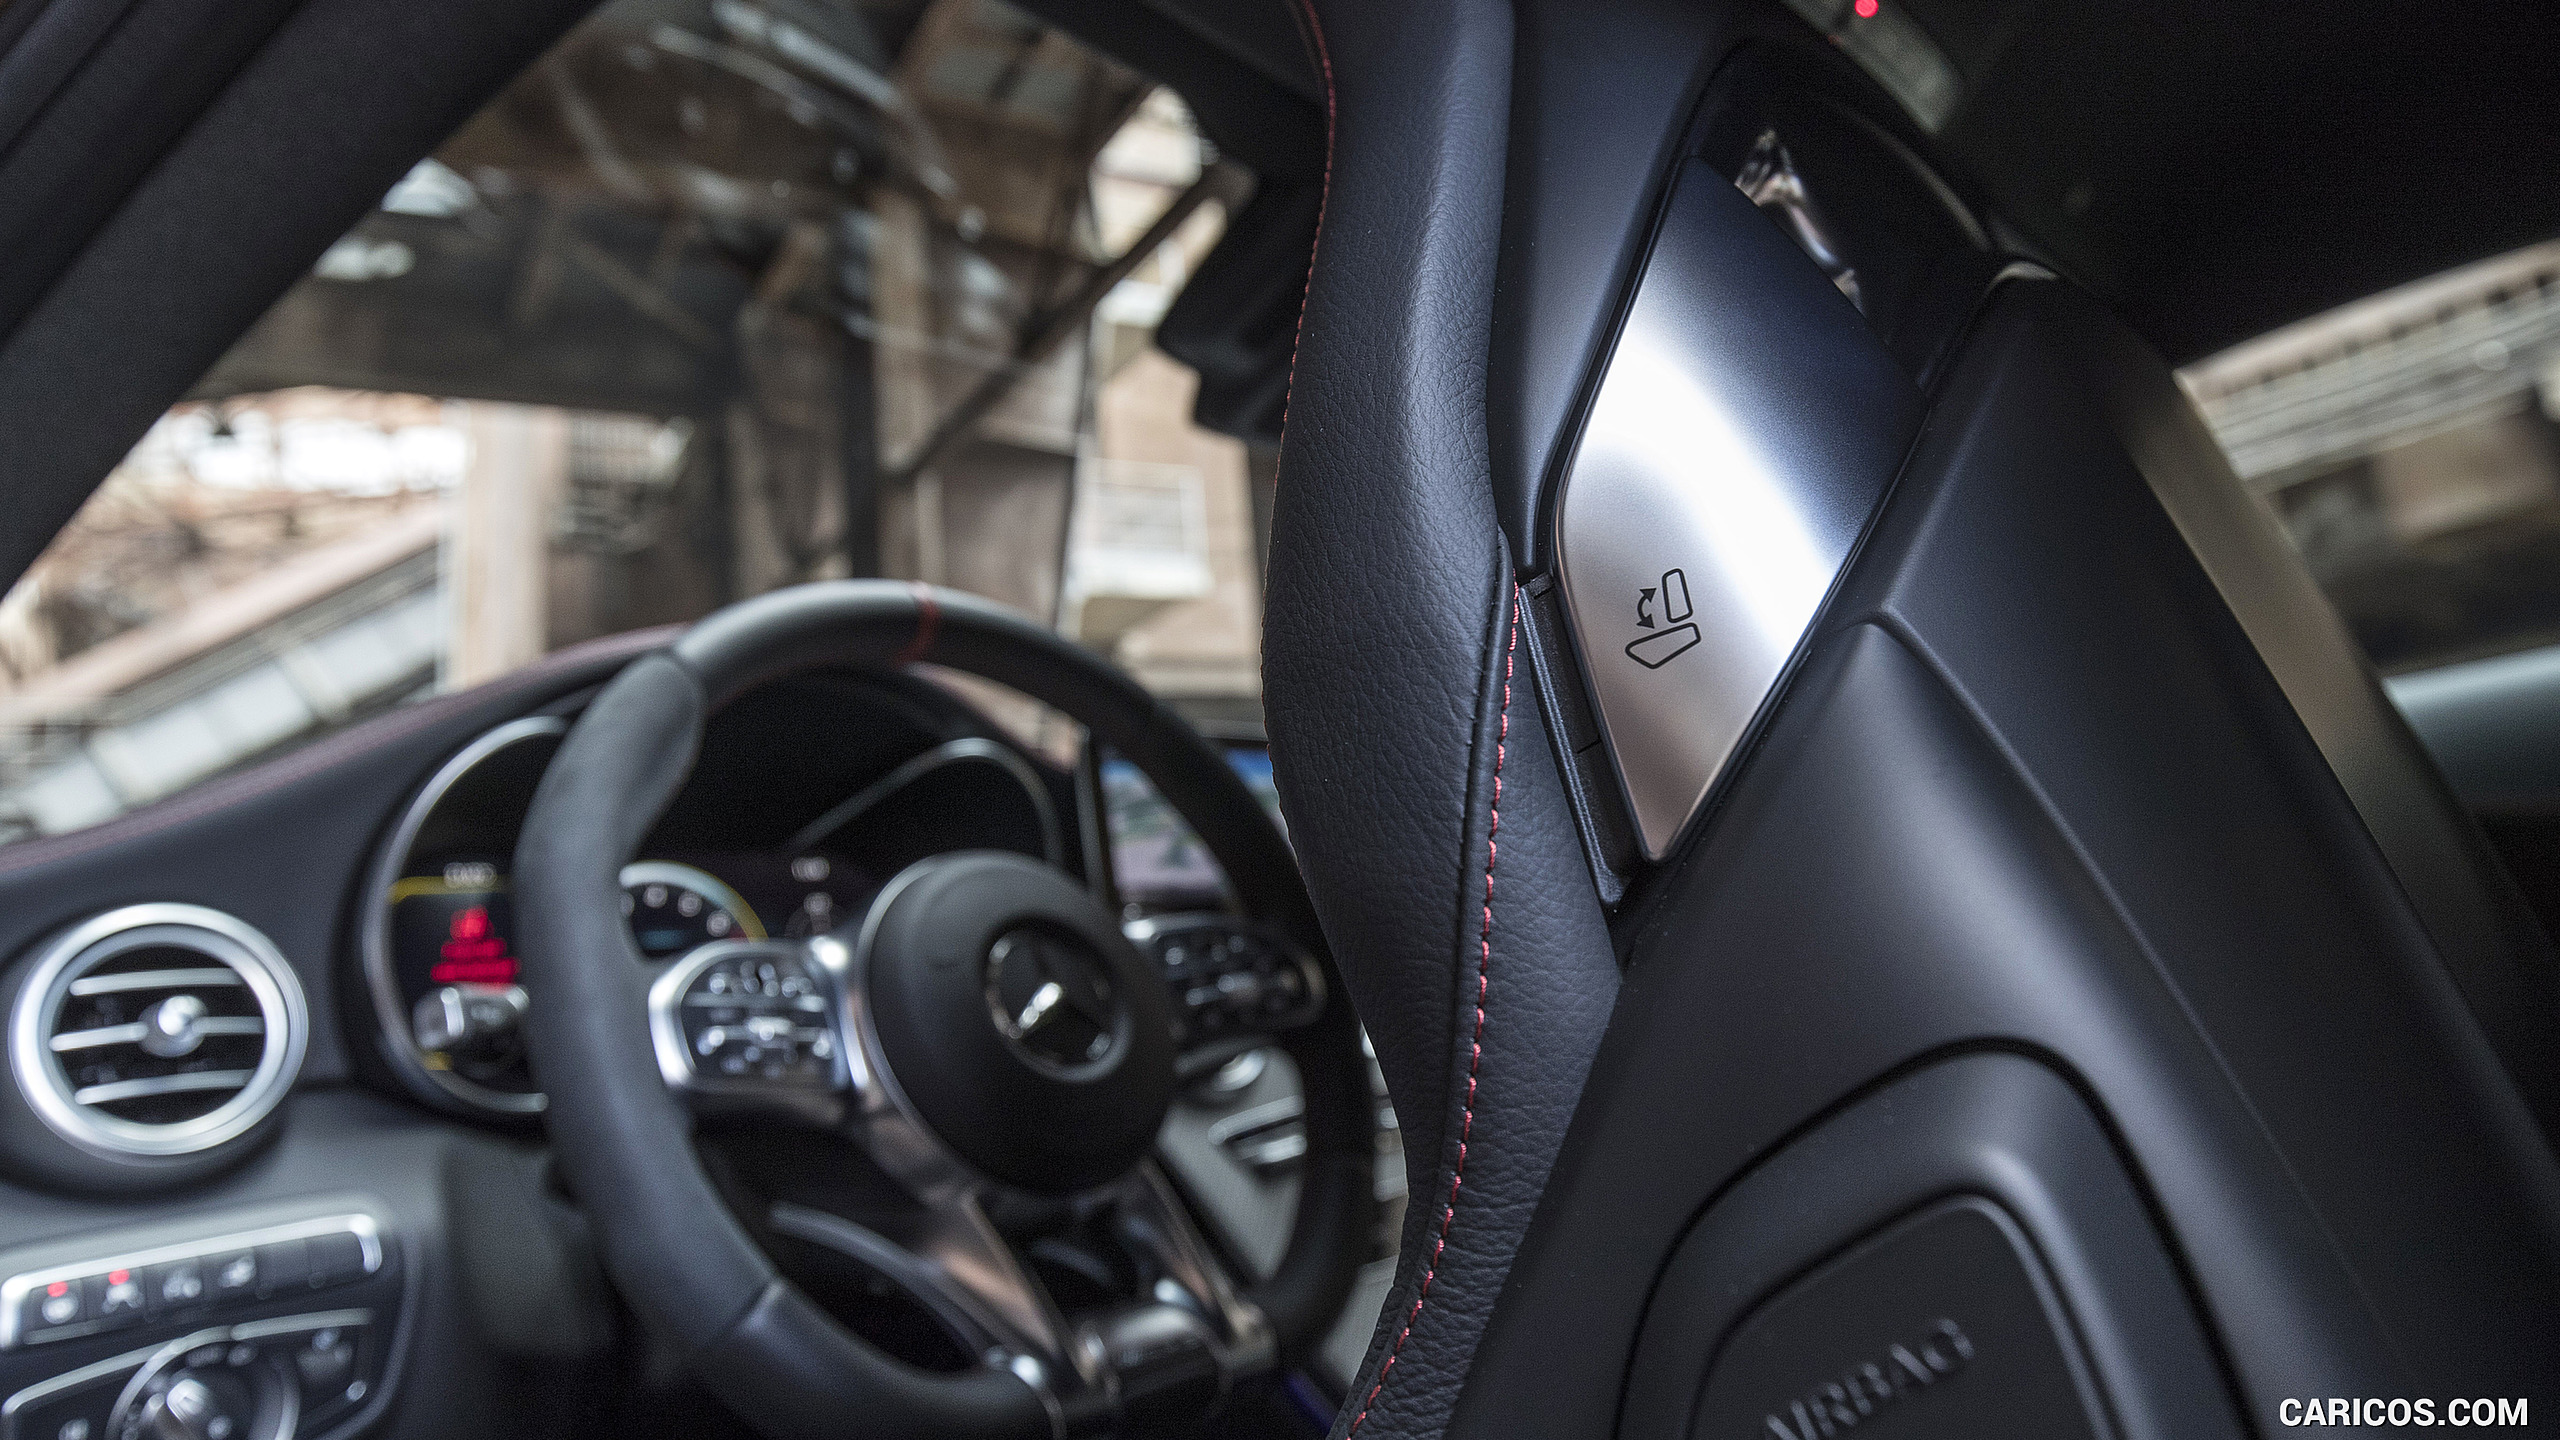 2019 Mercedes-AMG C43 4MATIC Coupe - Interior, Detail, #114 of 184